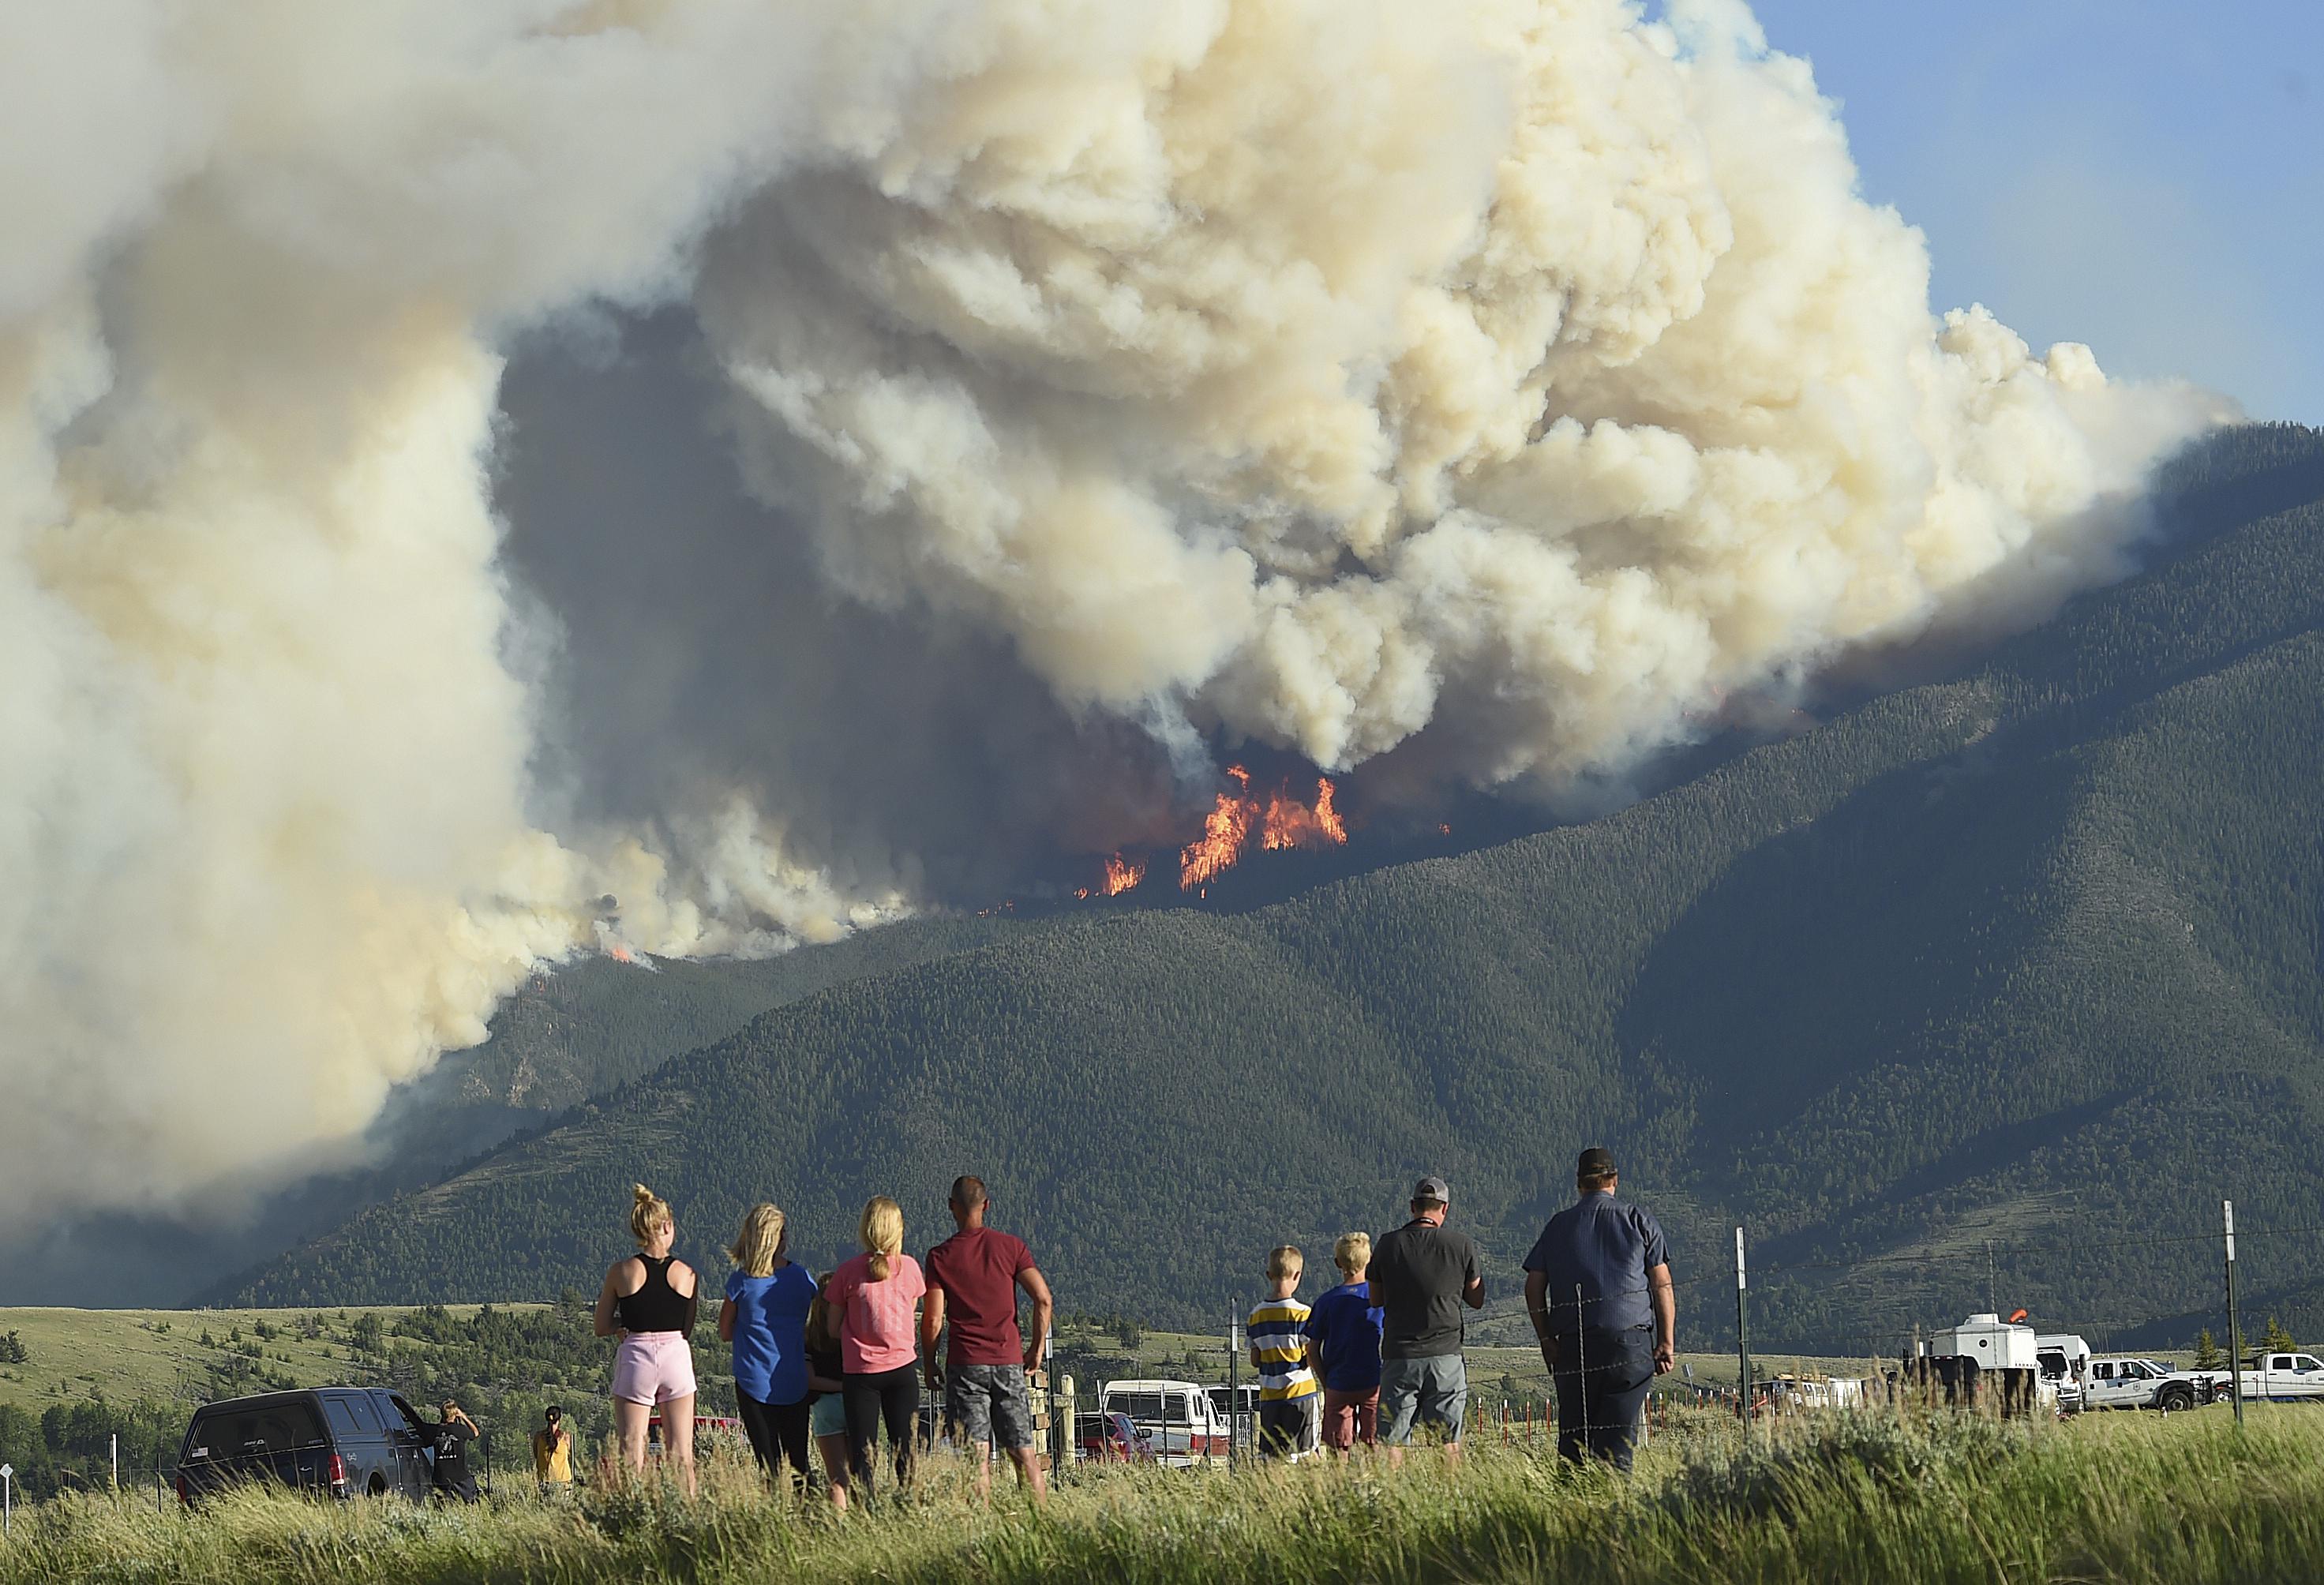 Fires stoked by heat, wind force evacuations in Montana